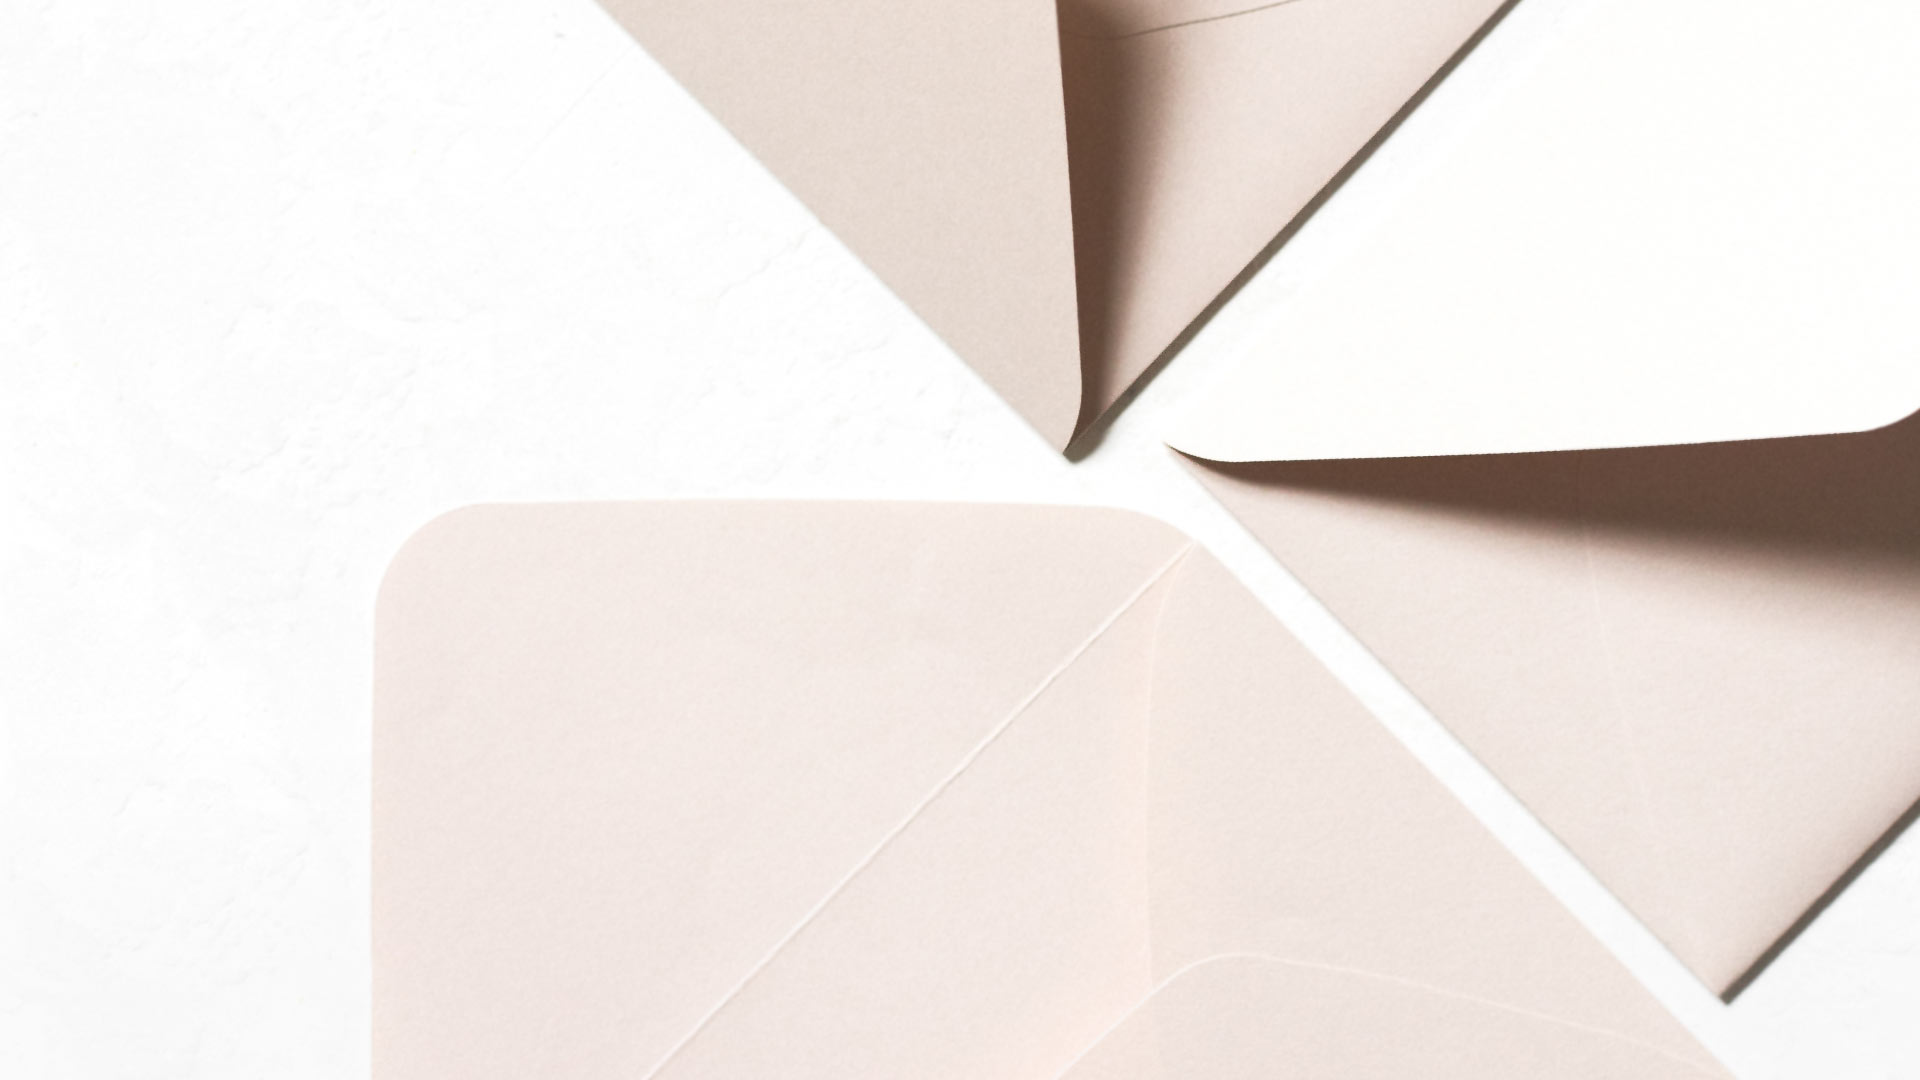 A composed image of paper envelopes arranged in a geometric pattern